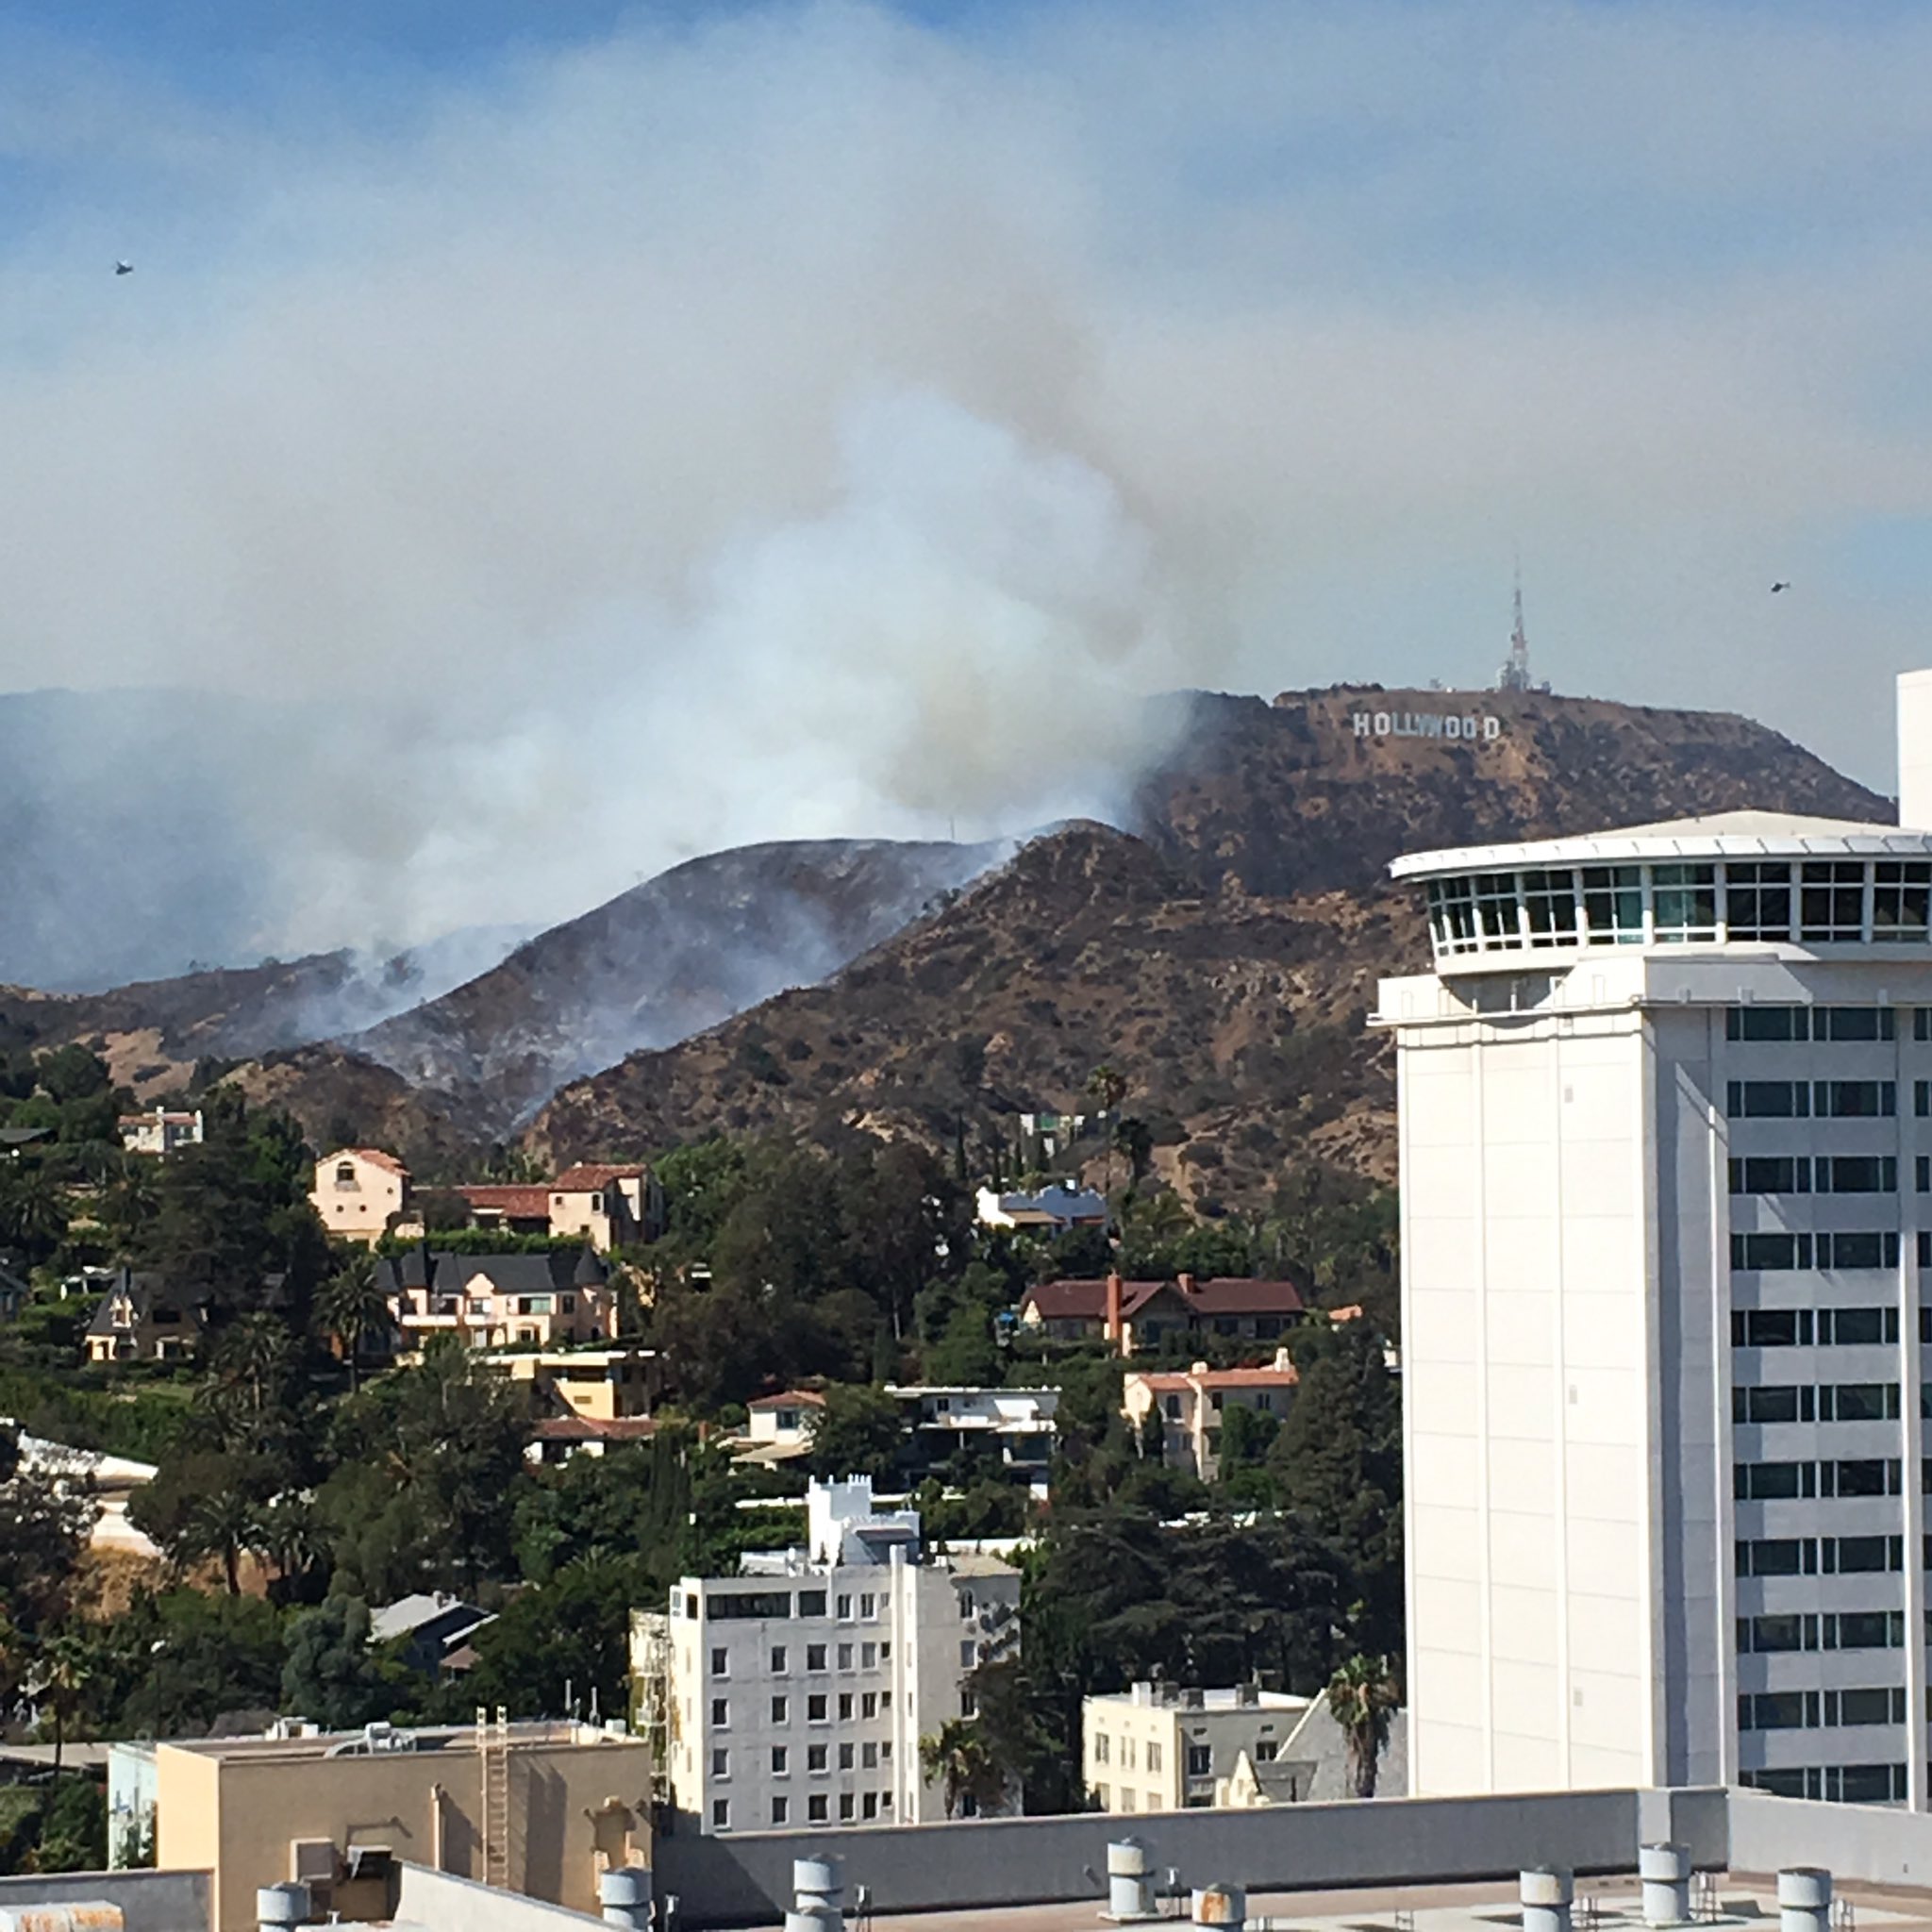 PHOTO: A brush fire burns in the Hollywood Hills in Los Angeles on July 19, 2016.